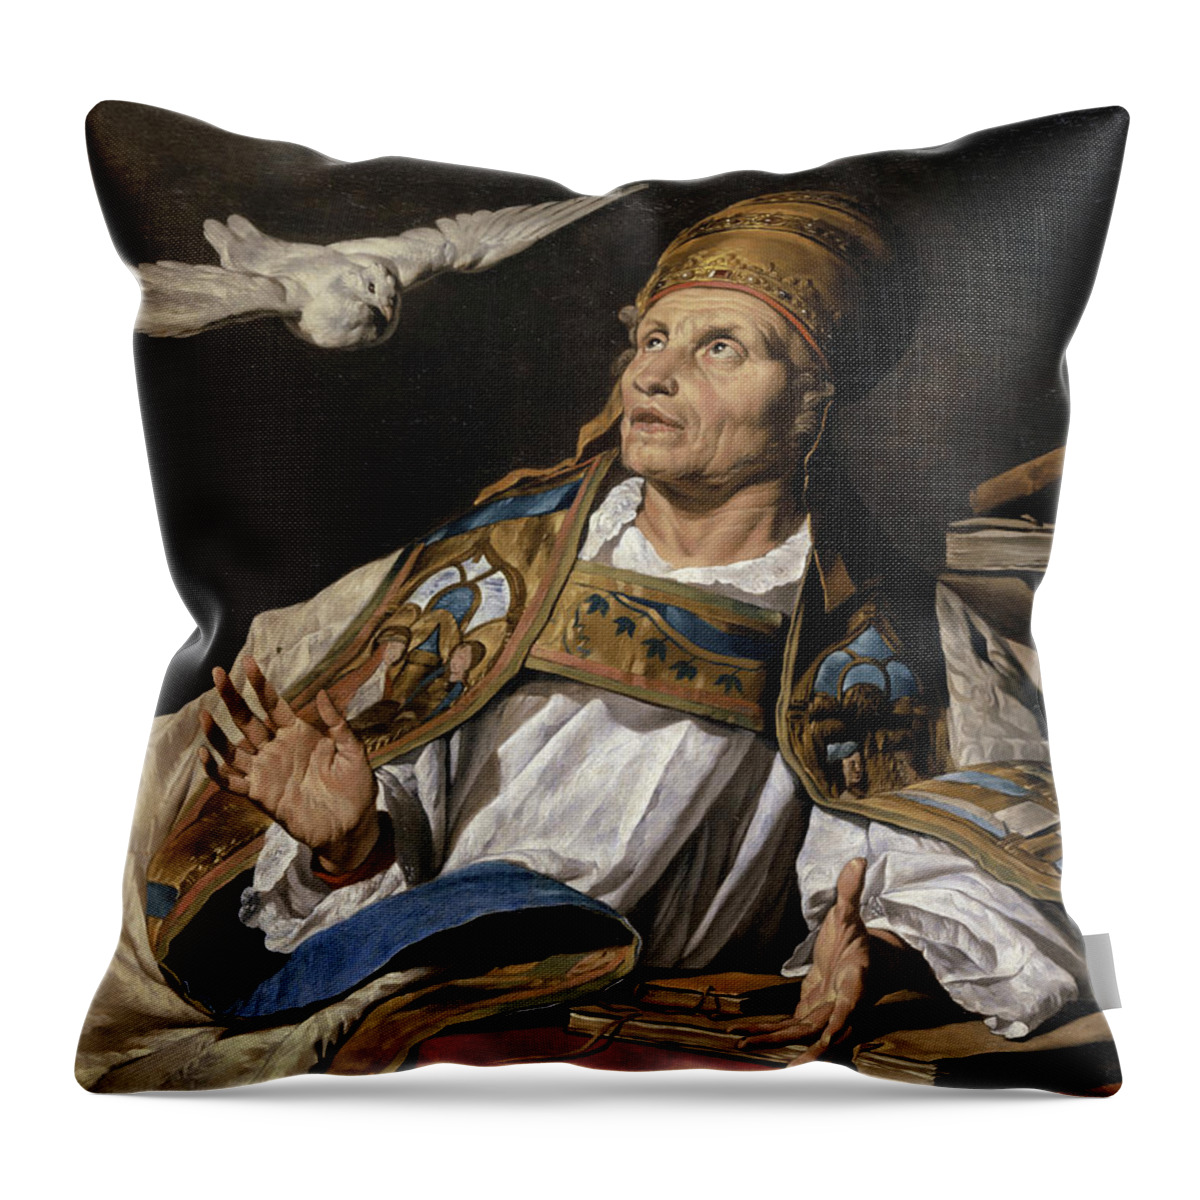 Saint Gregory Throw Pillow featuring the painting Saint Gregory by Matthias Stomer